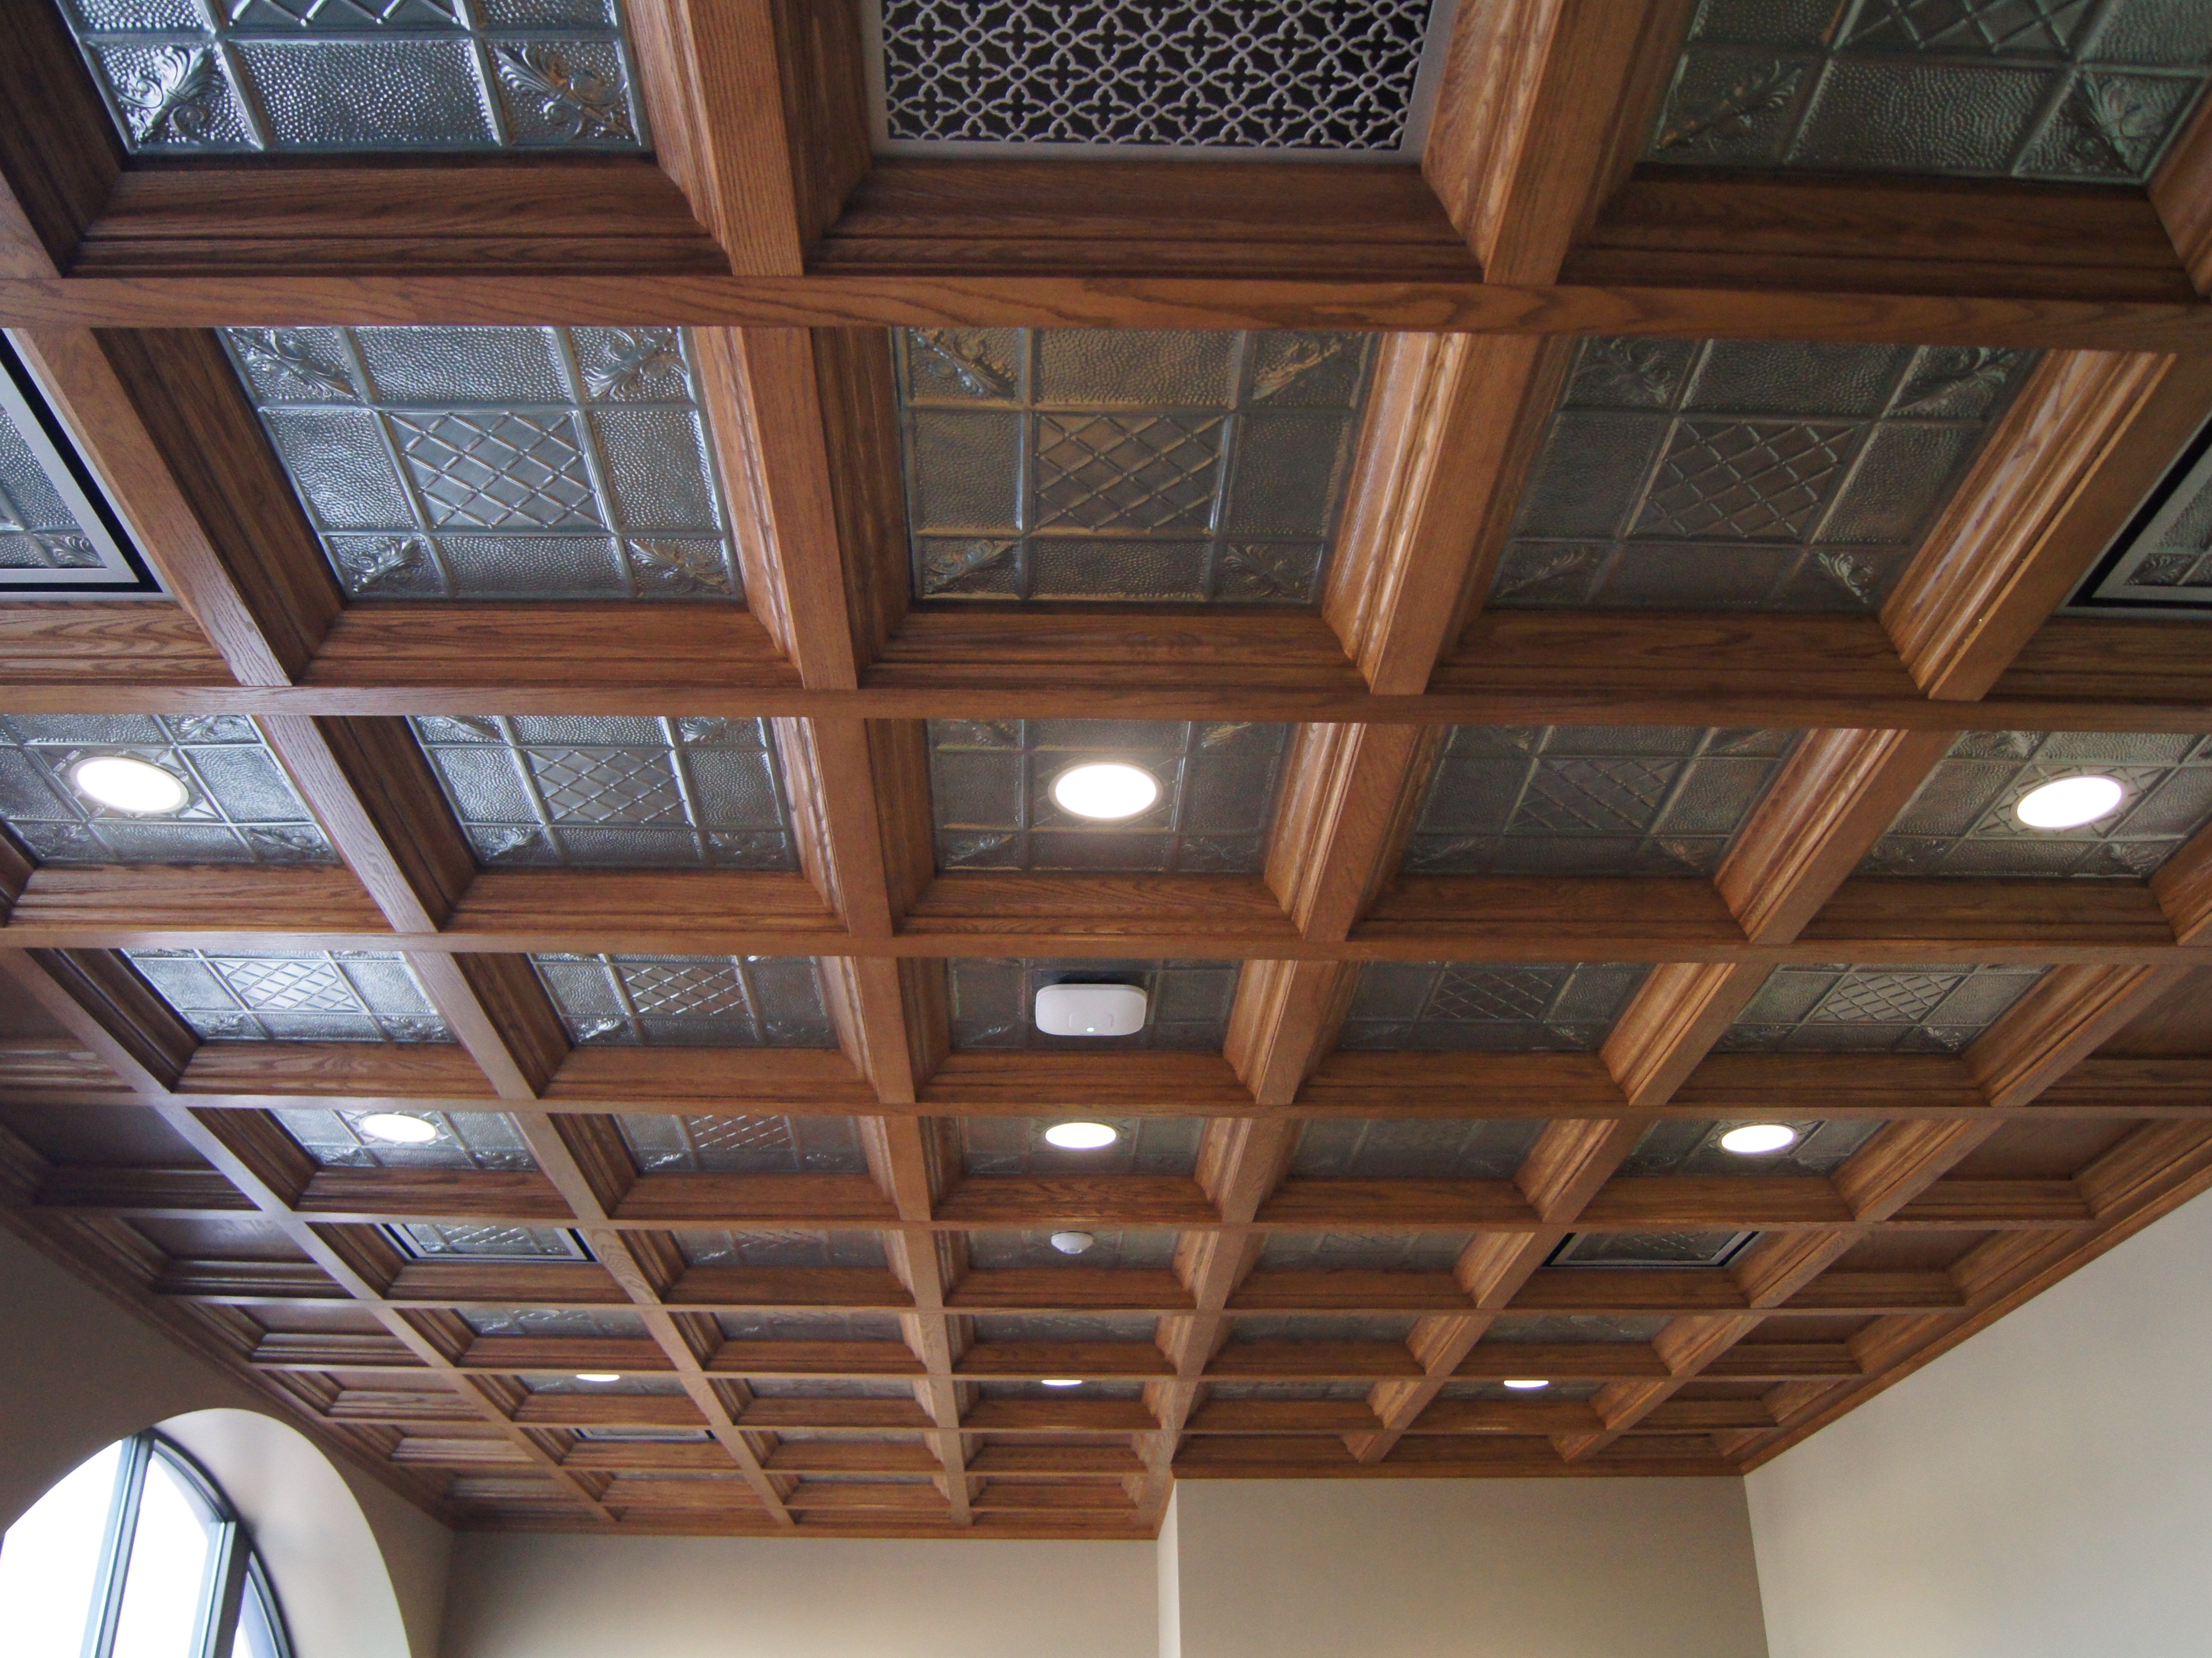 Woodgrid Coffered Ceilings By Midwestern Wood Products Co